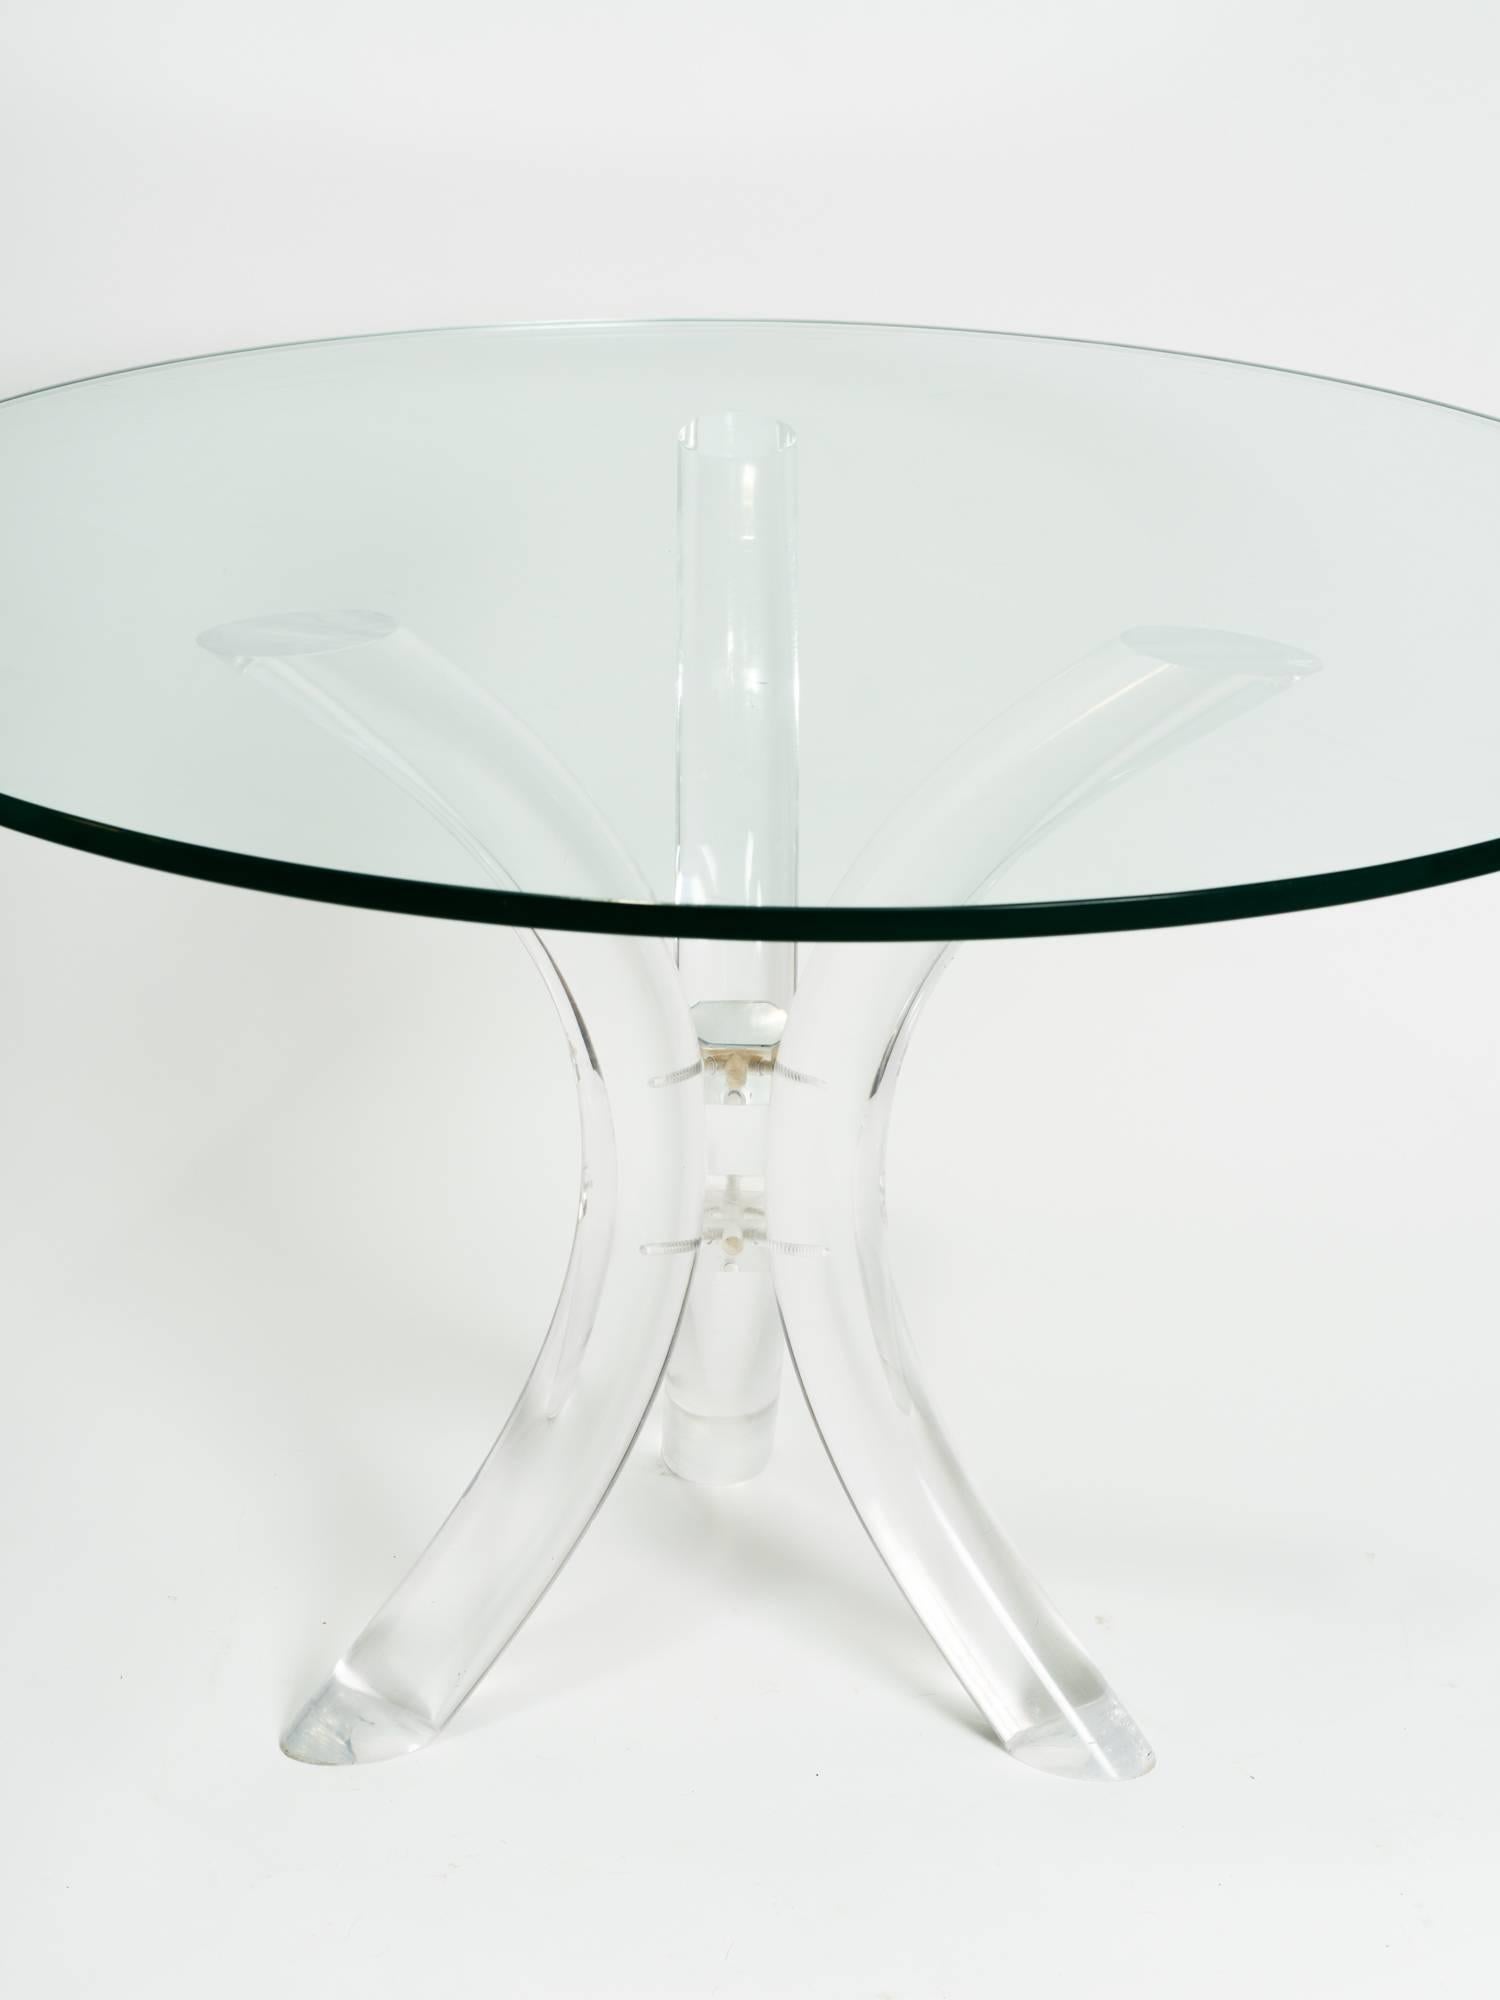 Sabre Bent Lucite Table with Glass Top In Good Condition For Sale In Tarrytown, NY